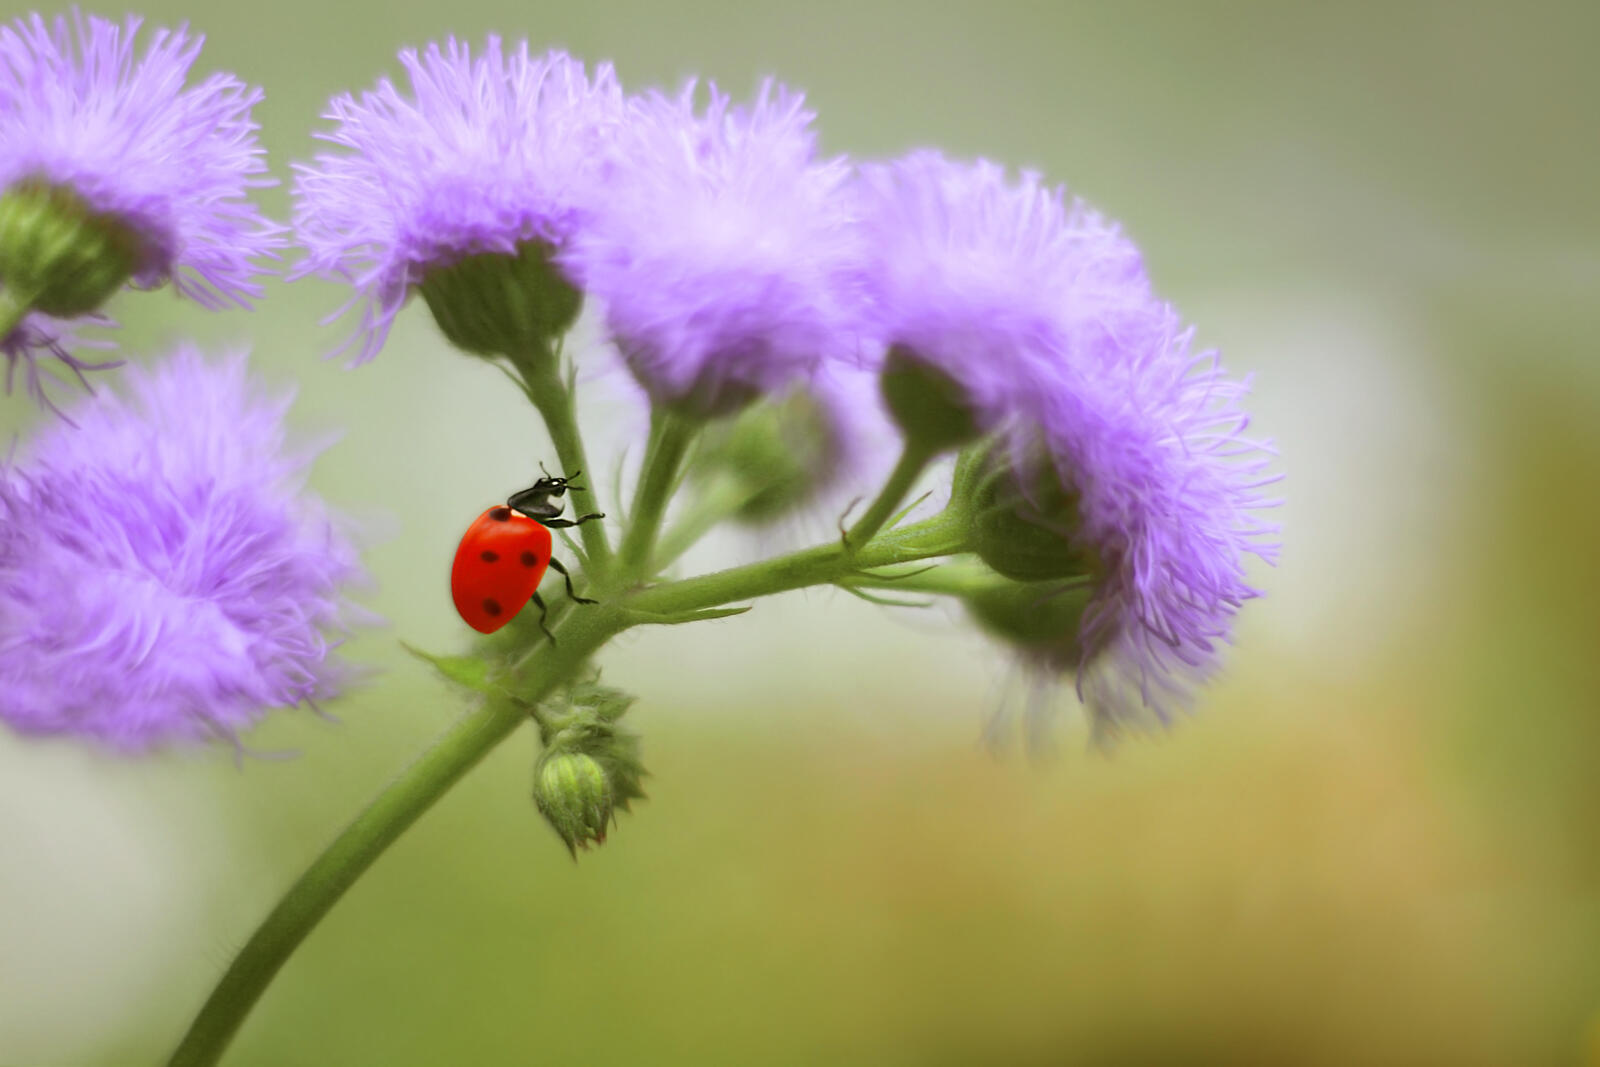 Wallpapers ladybug purple flowers insects on the desktop